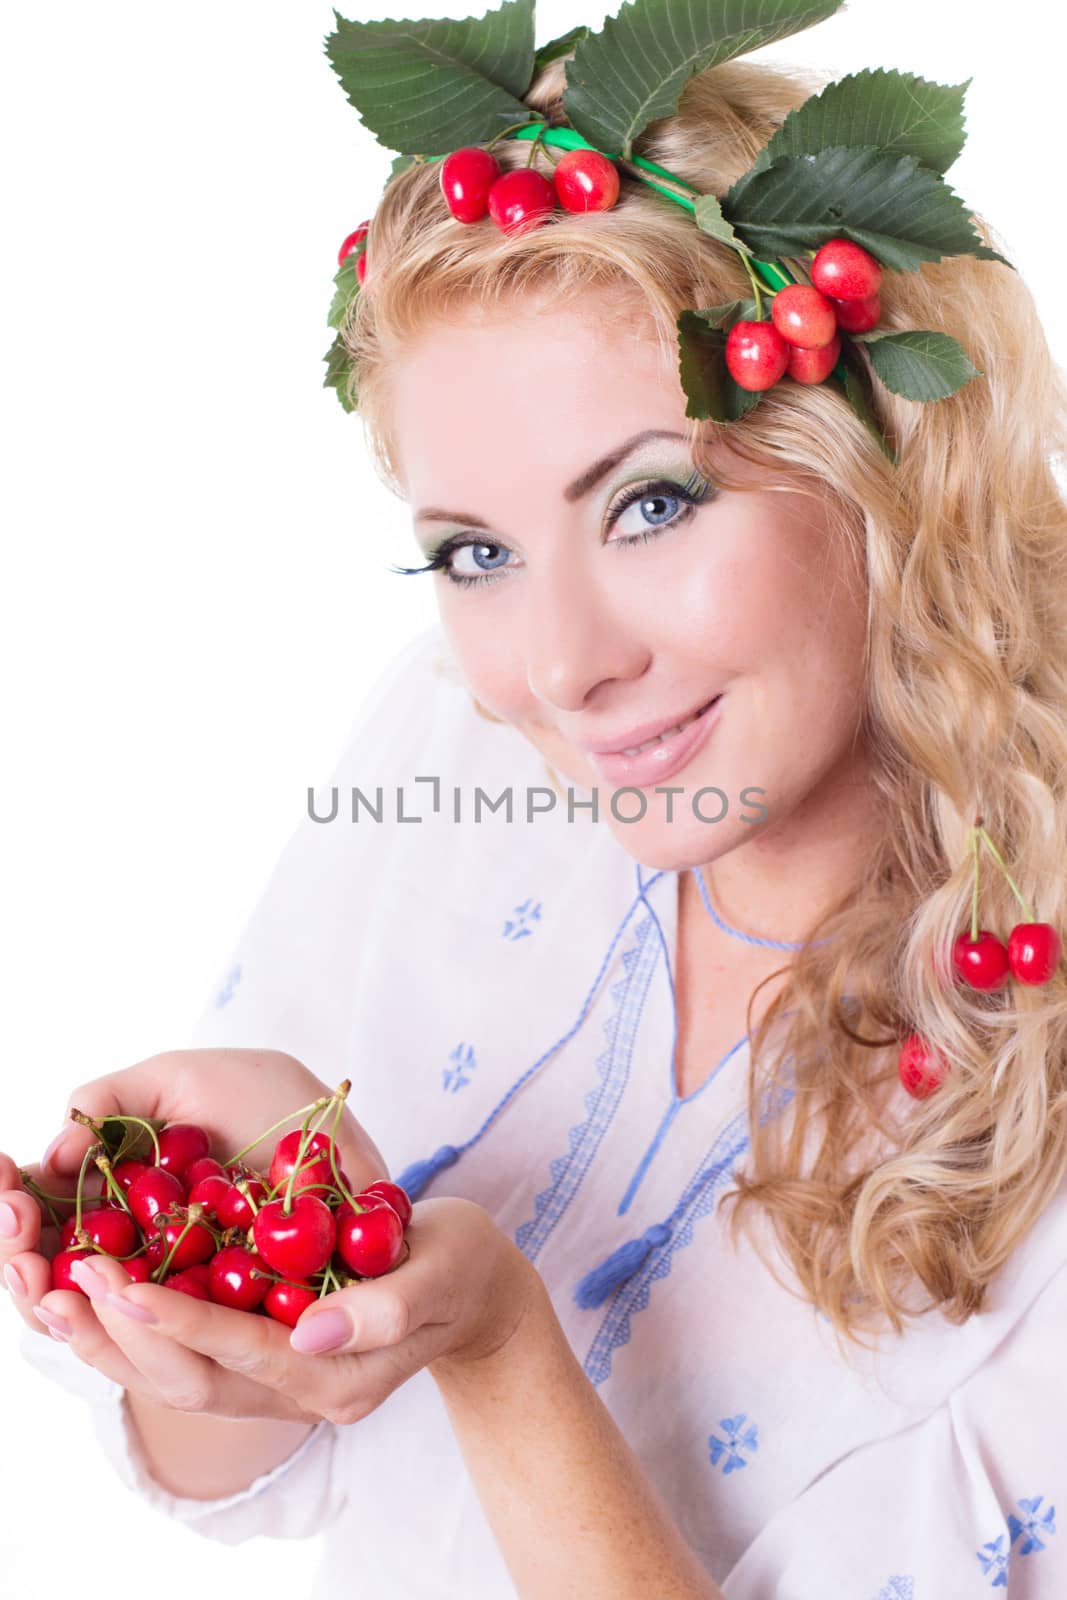 Sensual woman with cherries in hands and hair by Angel_a